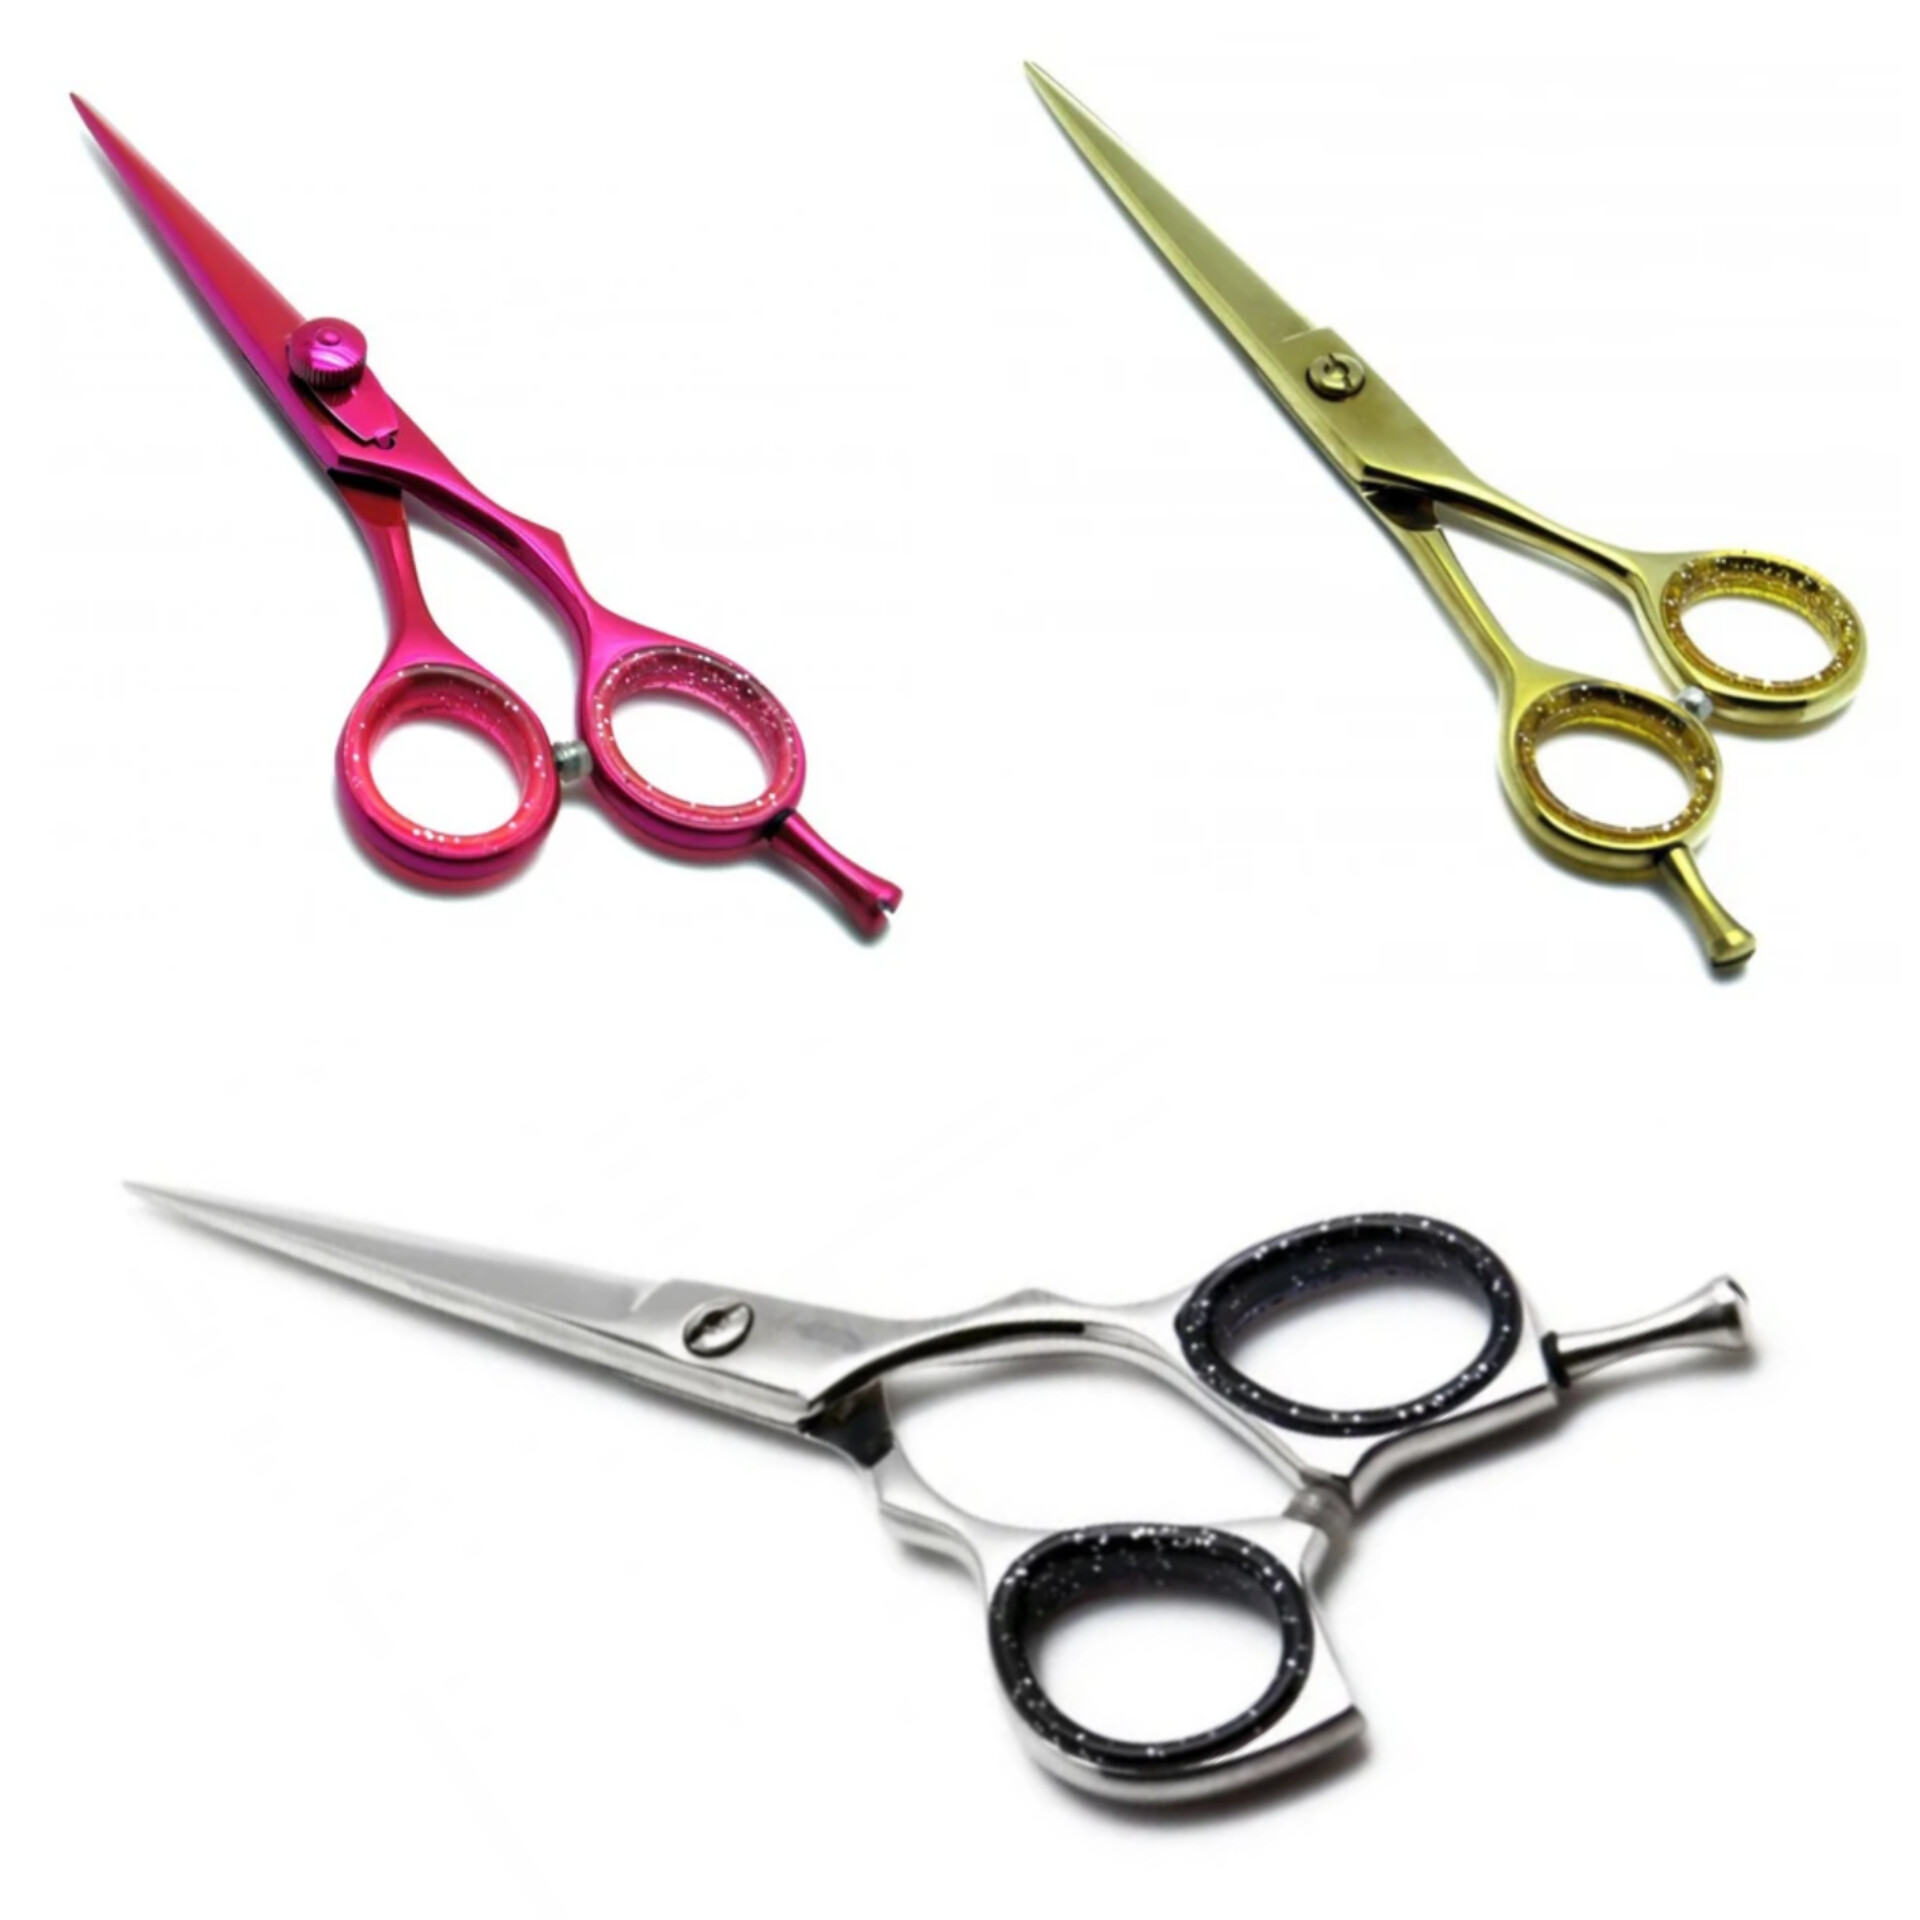 #3785 Barber Hair Cutting Professional Hairdressing Scissors